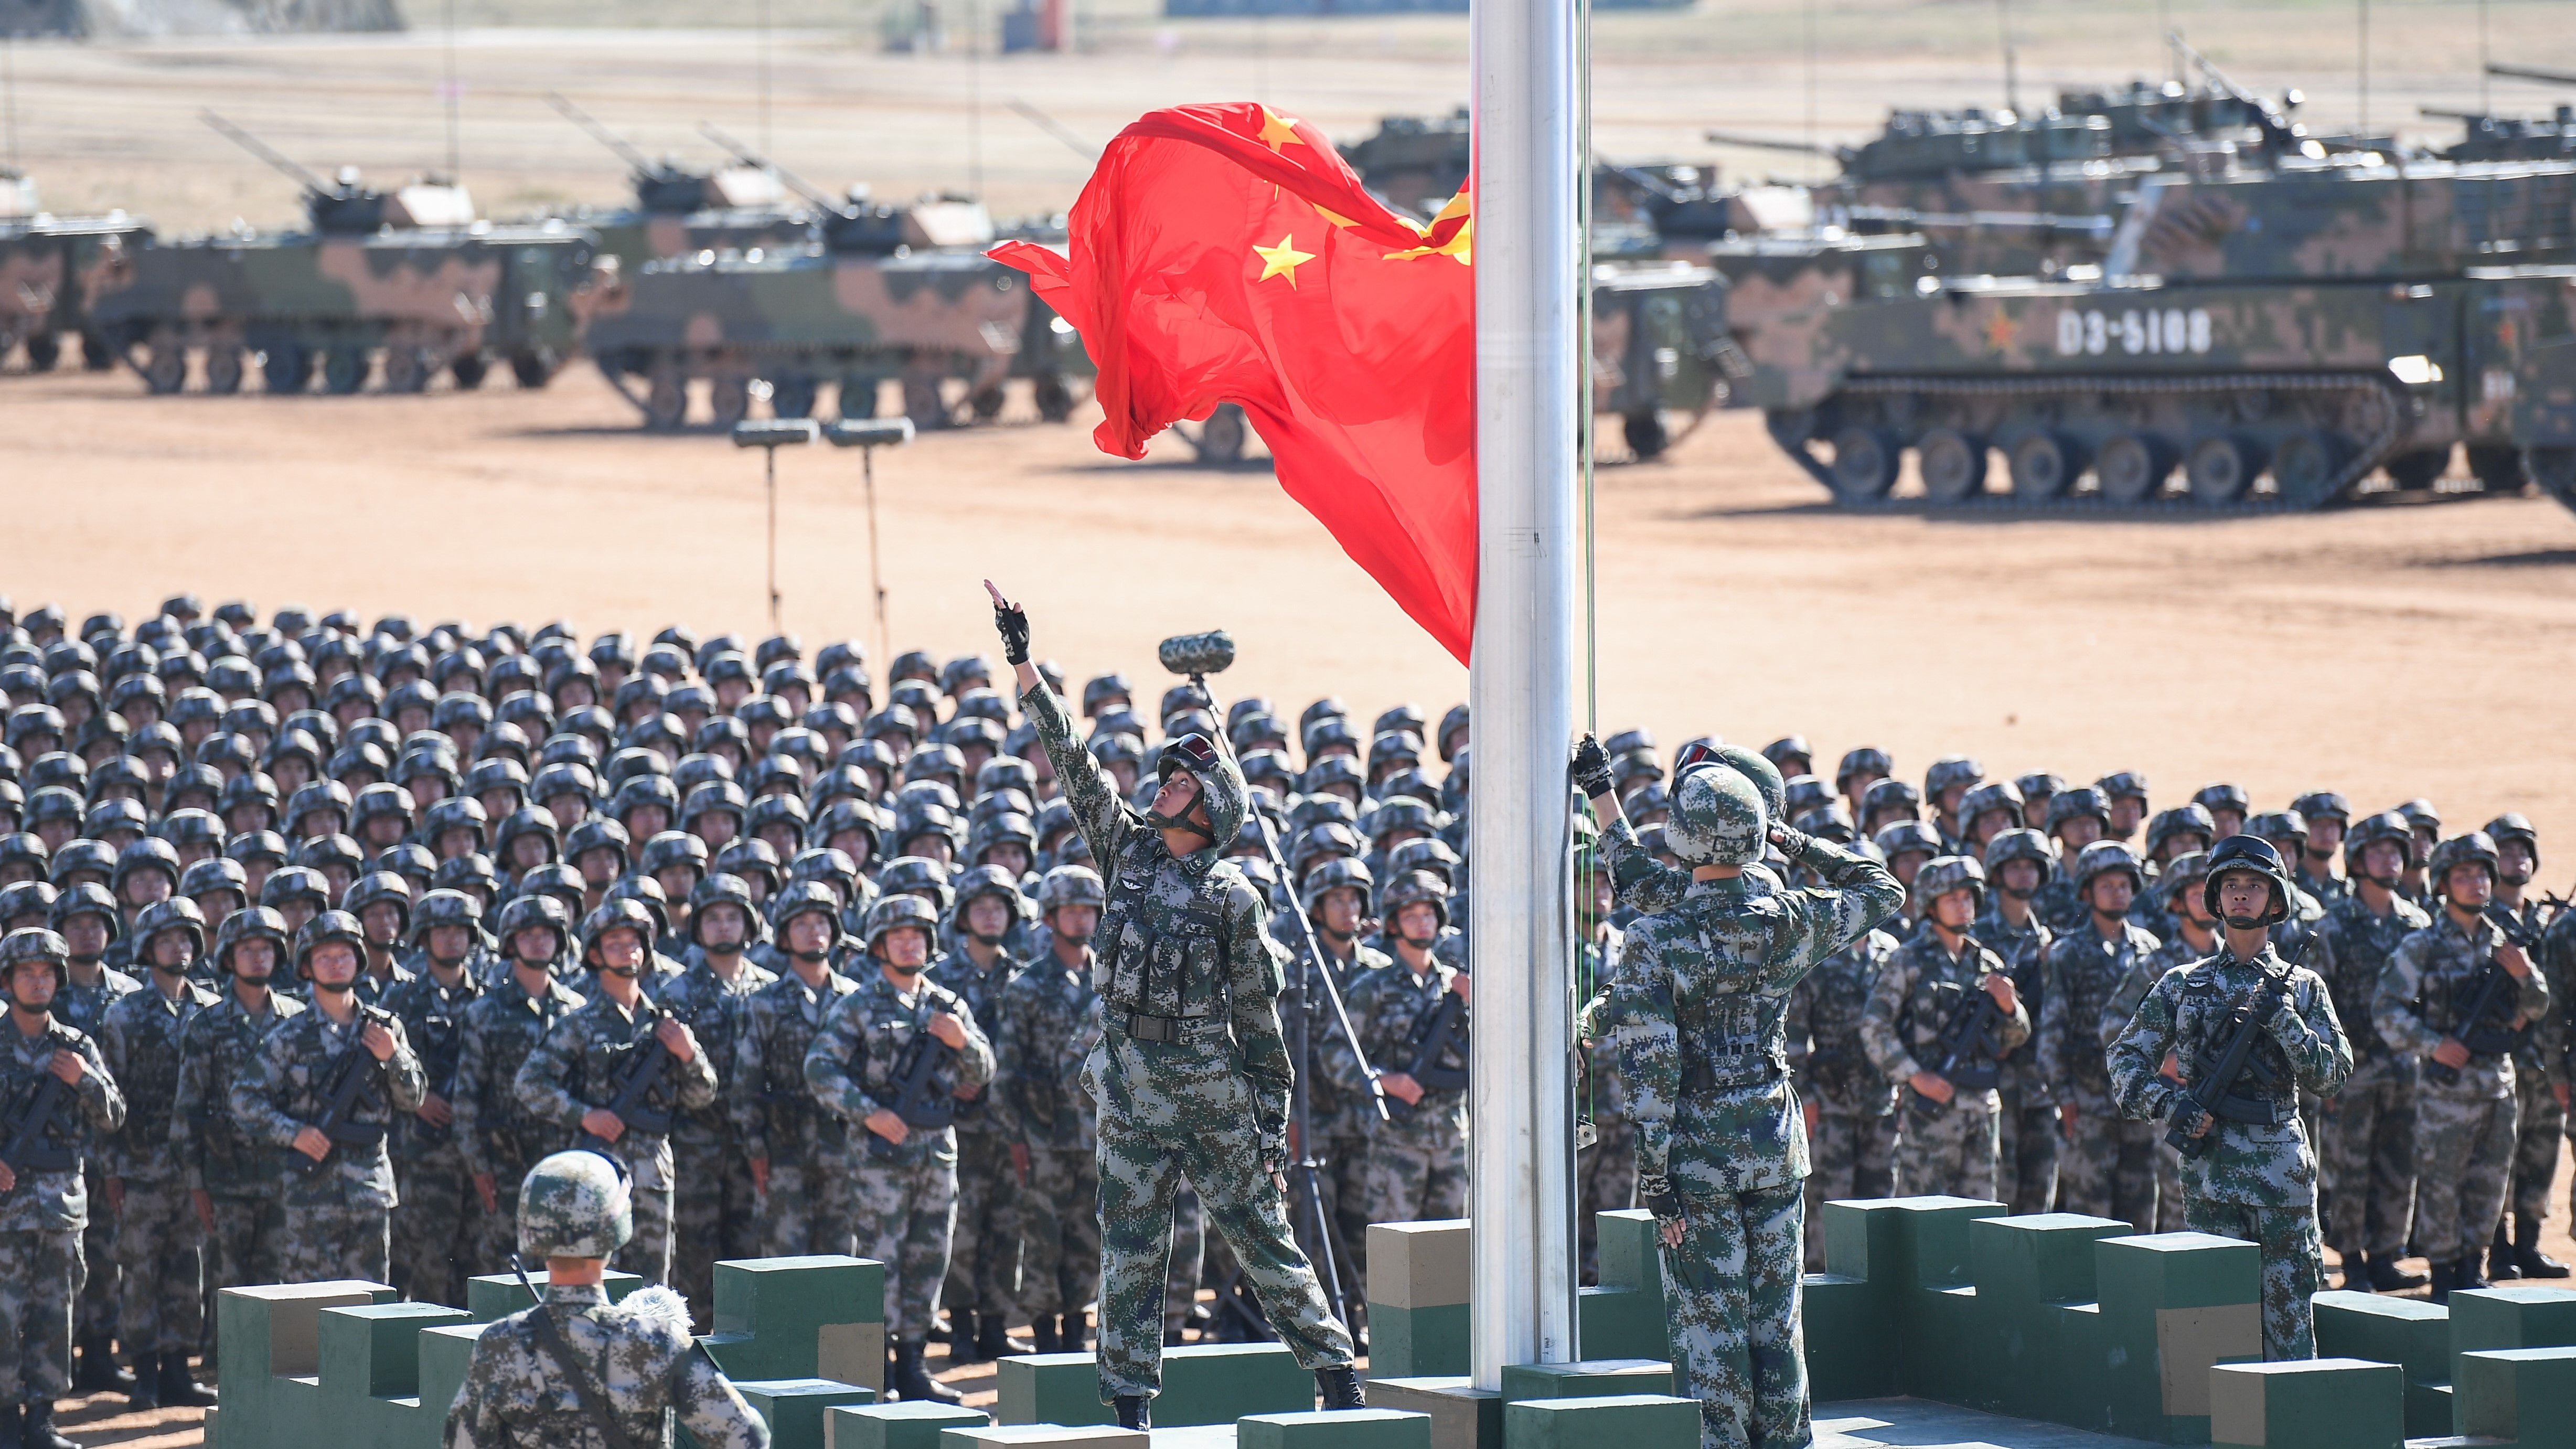 The Army wants you to get smart on China's military structure and tactics